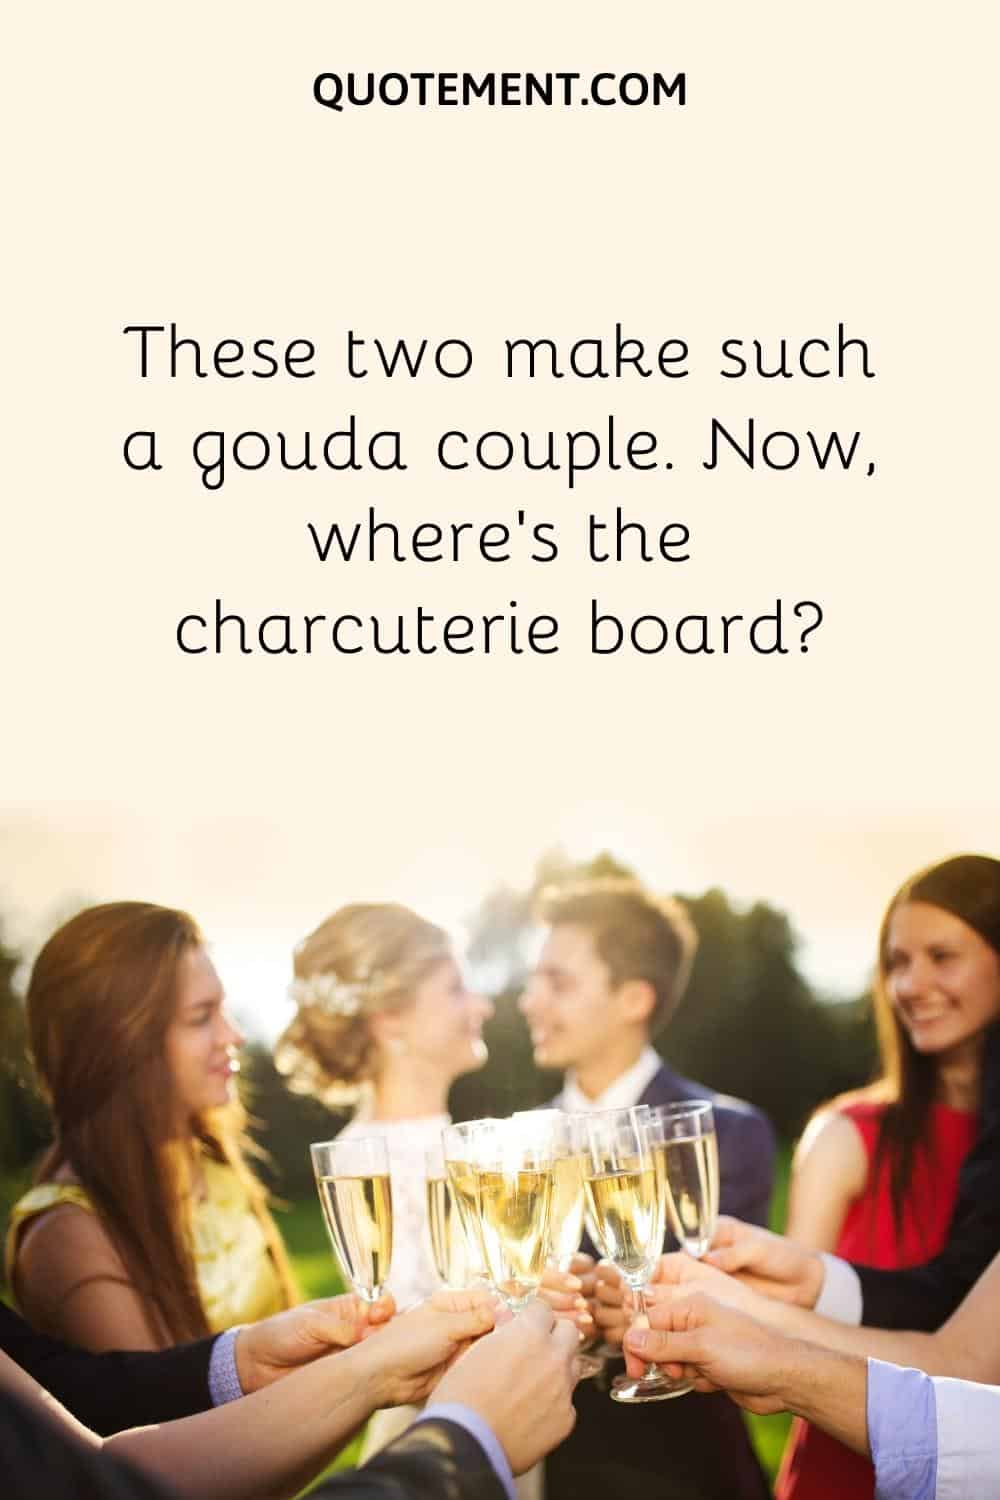 These two make such a gouda couple. Now, where's the charcuterie board